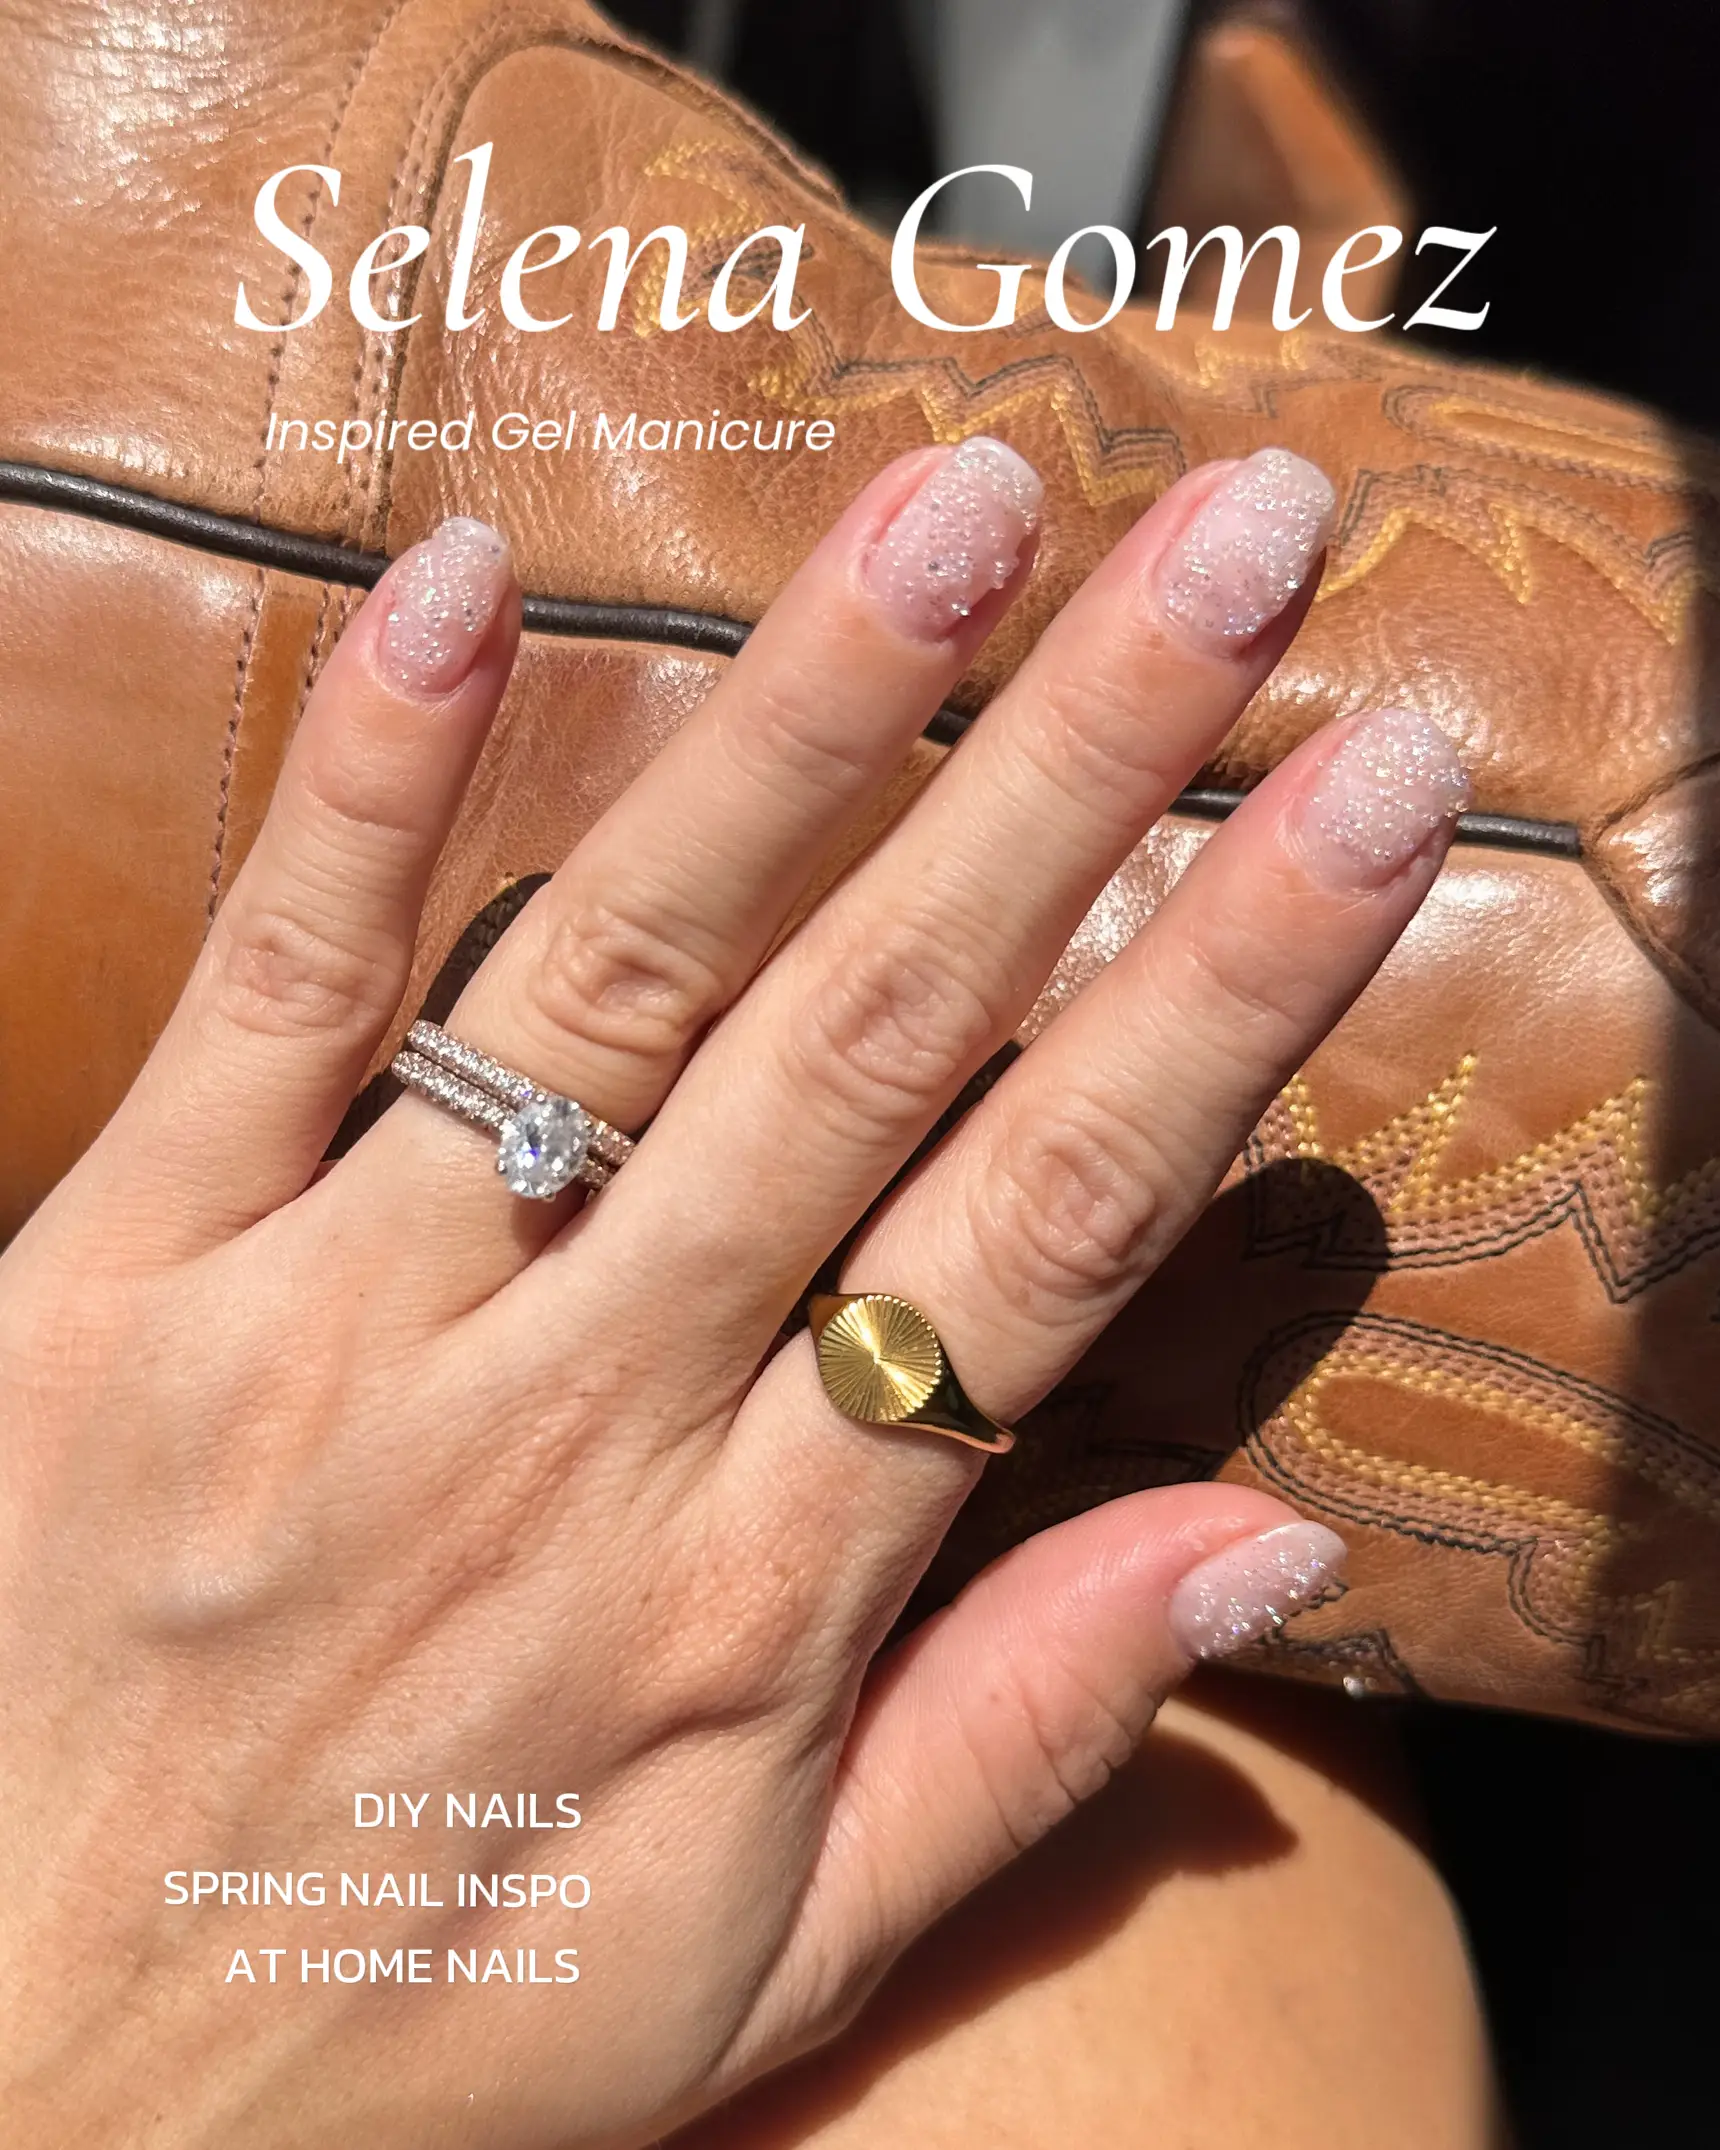 Selena Gomez's Jade Green Manicure Is the Perfect Color to Ring In